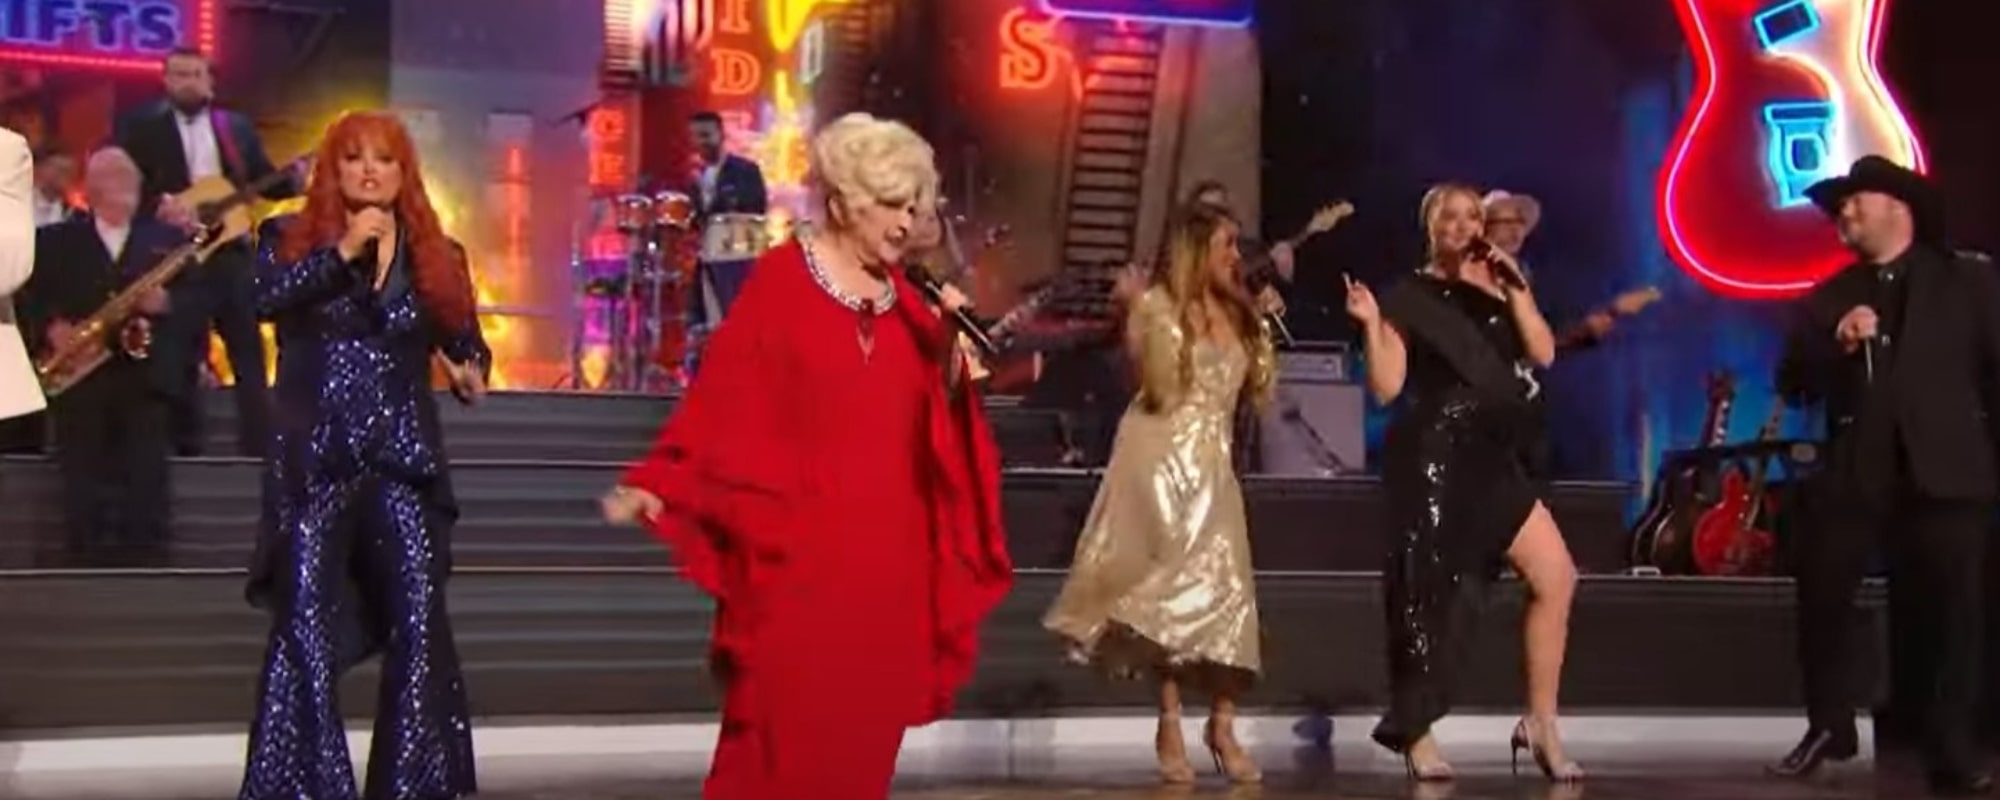 Watch: Brenda Lee Performs “Rockin’ Around the Christmas Tree” to Close Out ‘Christmas at the Opry’